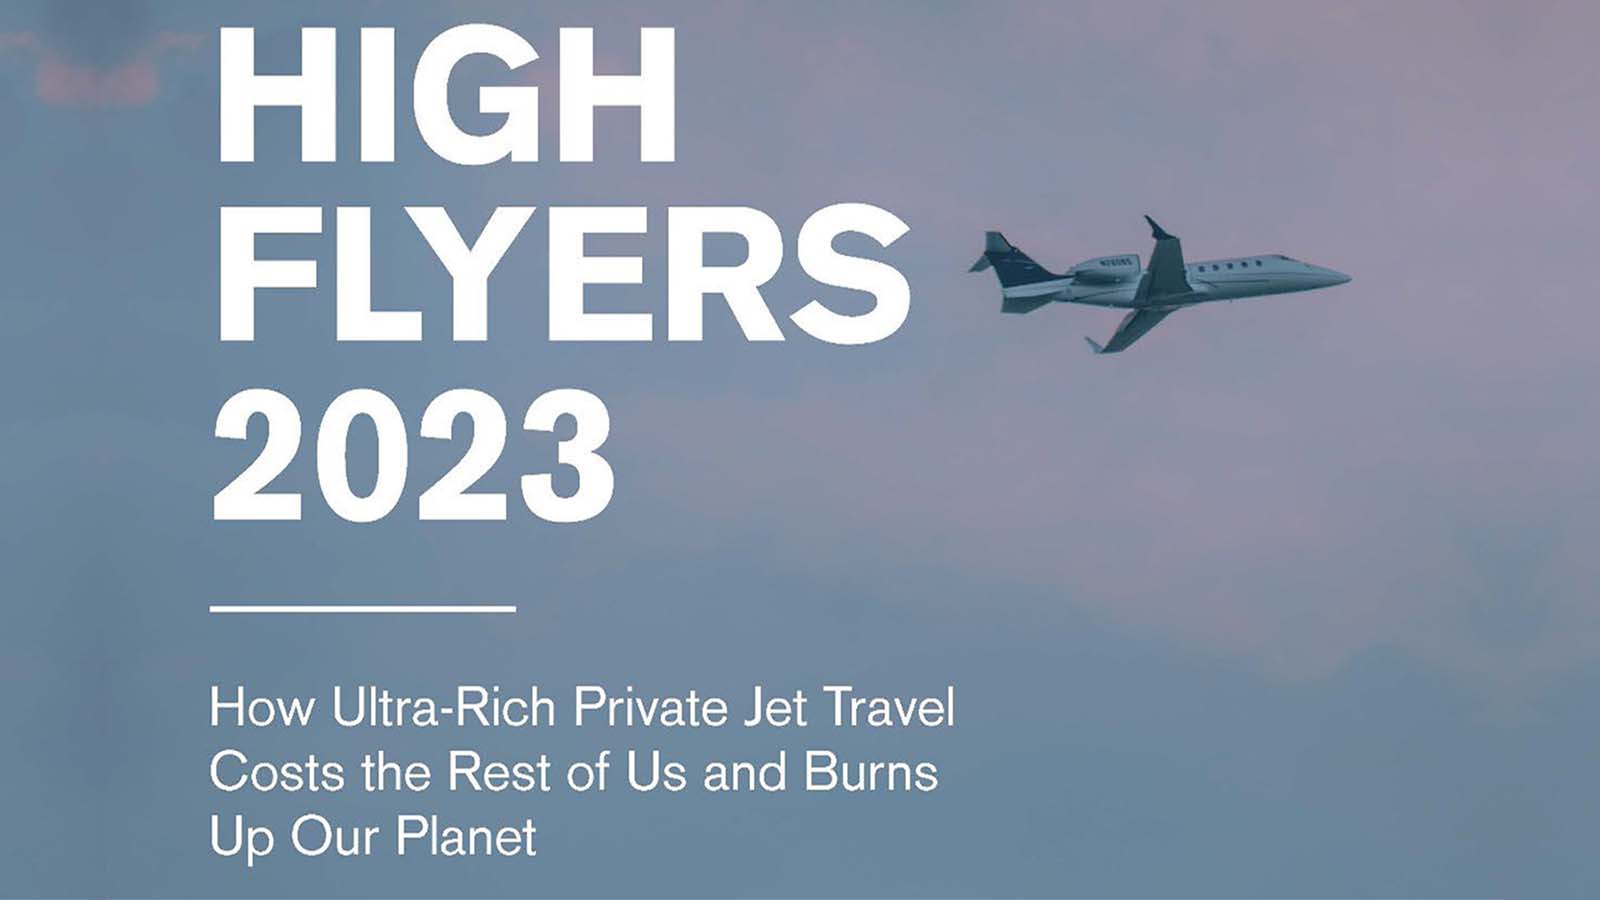 Report: High Flyers 2023: How Ultra-Rich Private Jet Travel Costs the Rest of Us and Burns Up the Planet